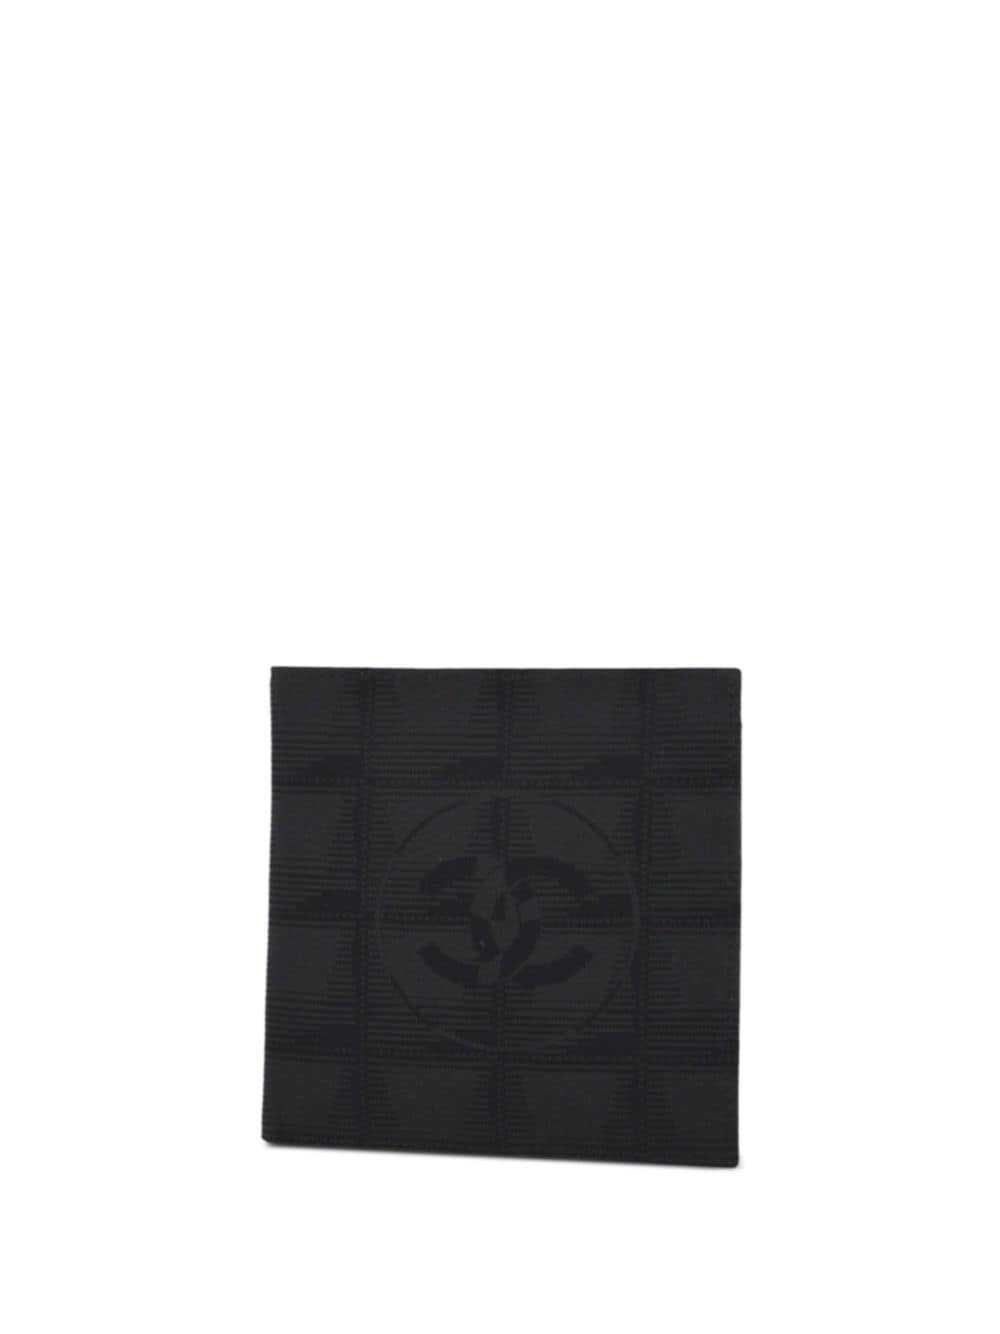 CHANEL Pre-Owned 2003 CC Travel Line wallet - Bla… - image 2